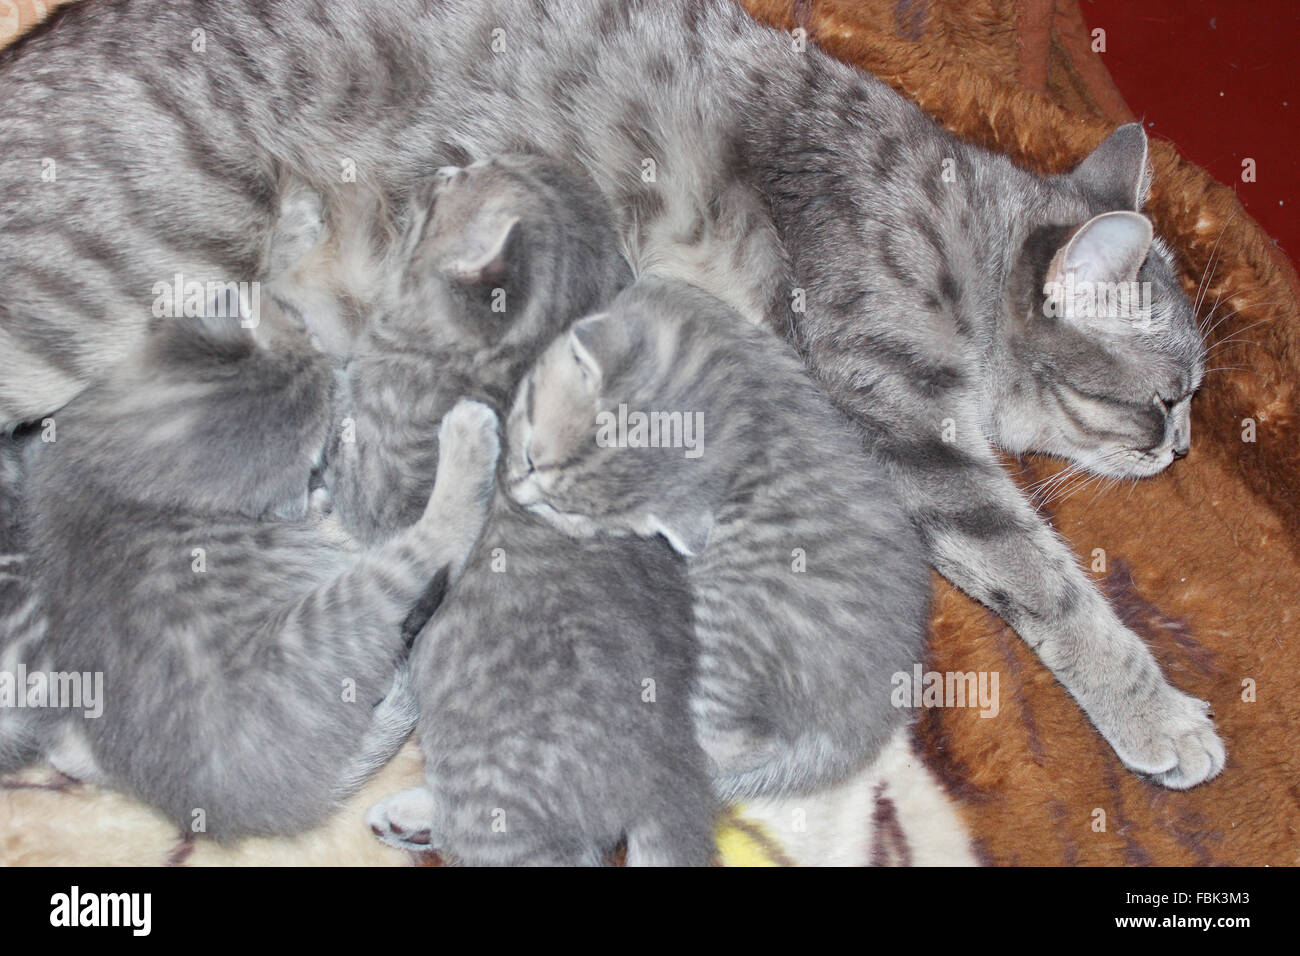 cat and its kittens of Scottish Straight breed Stock Photo